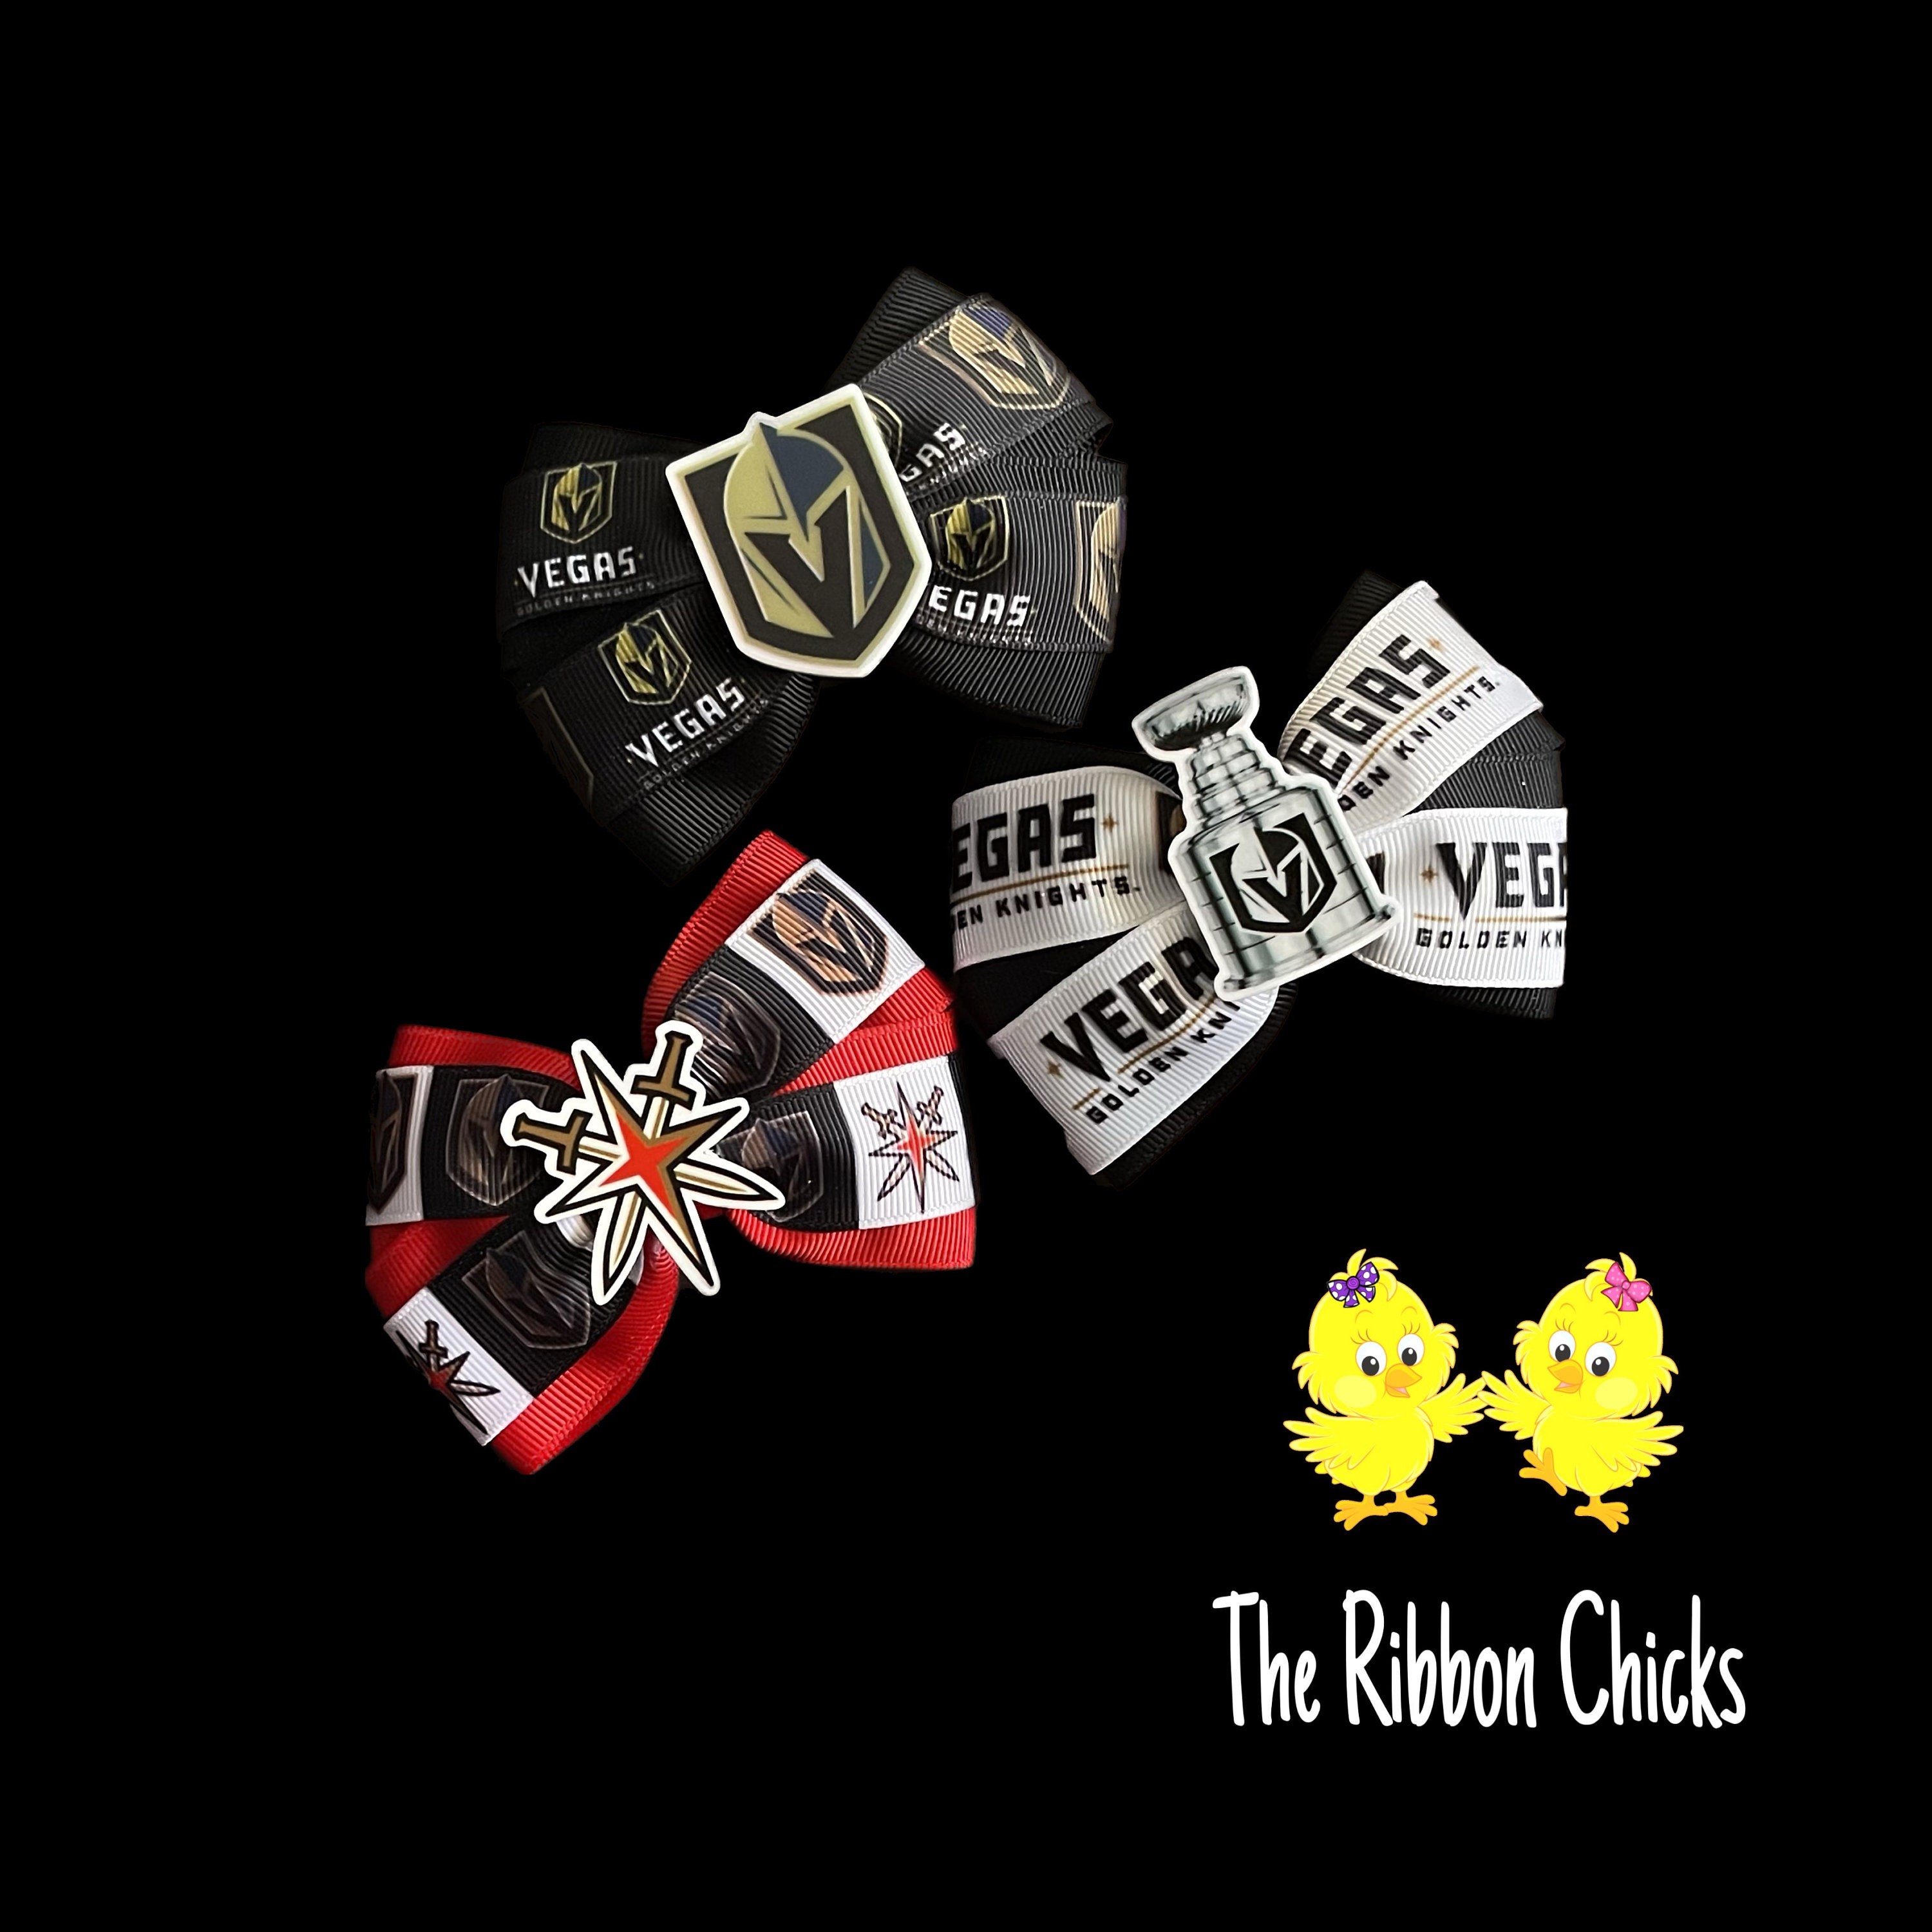 Vegas Golden Knights Special Edition Collector Pin